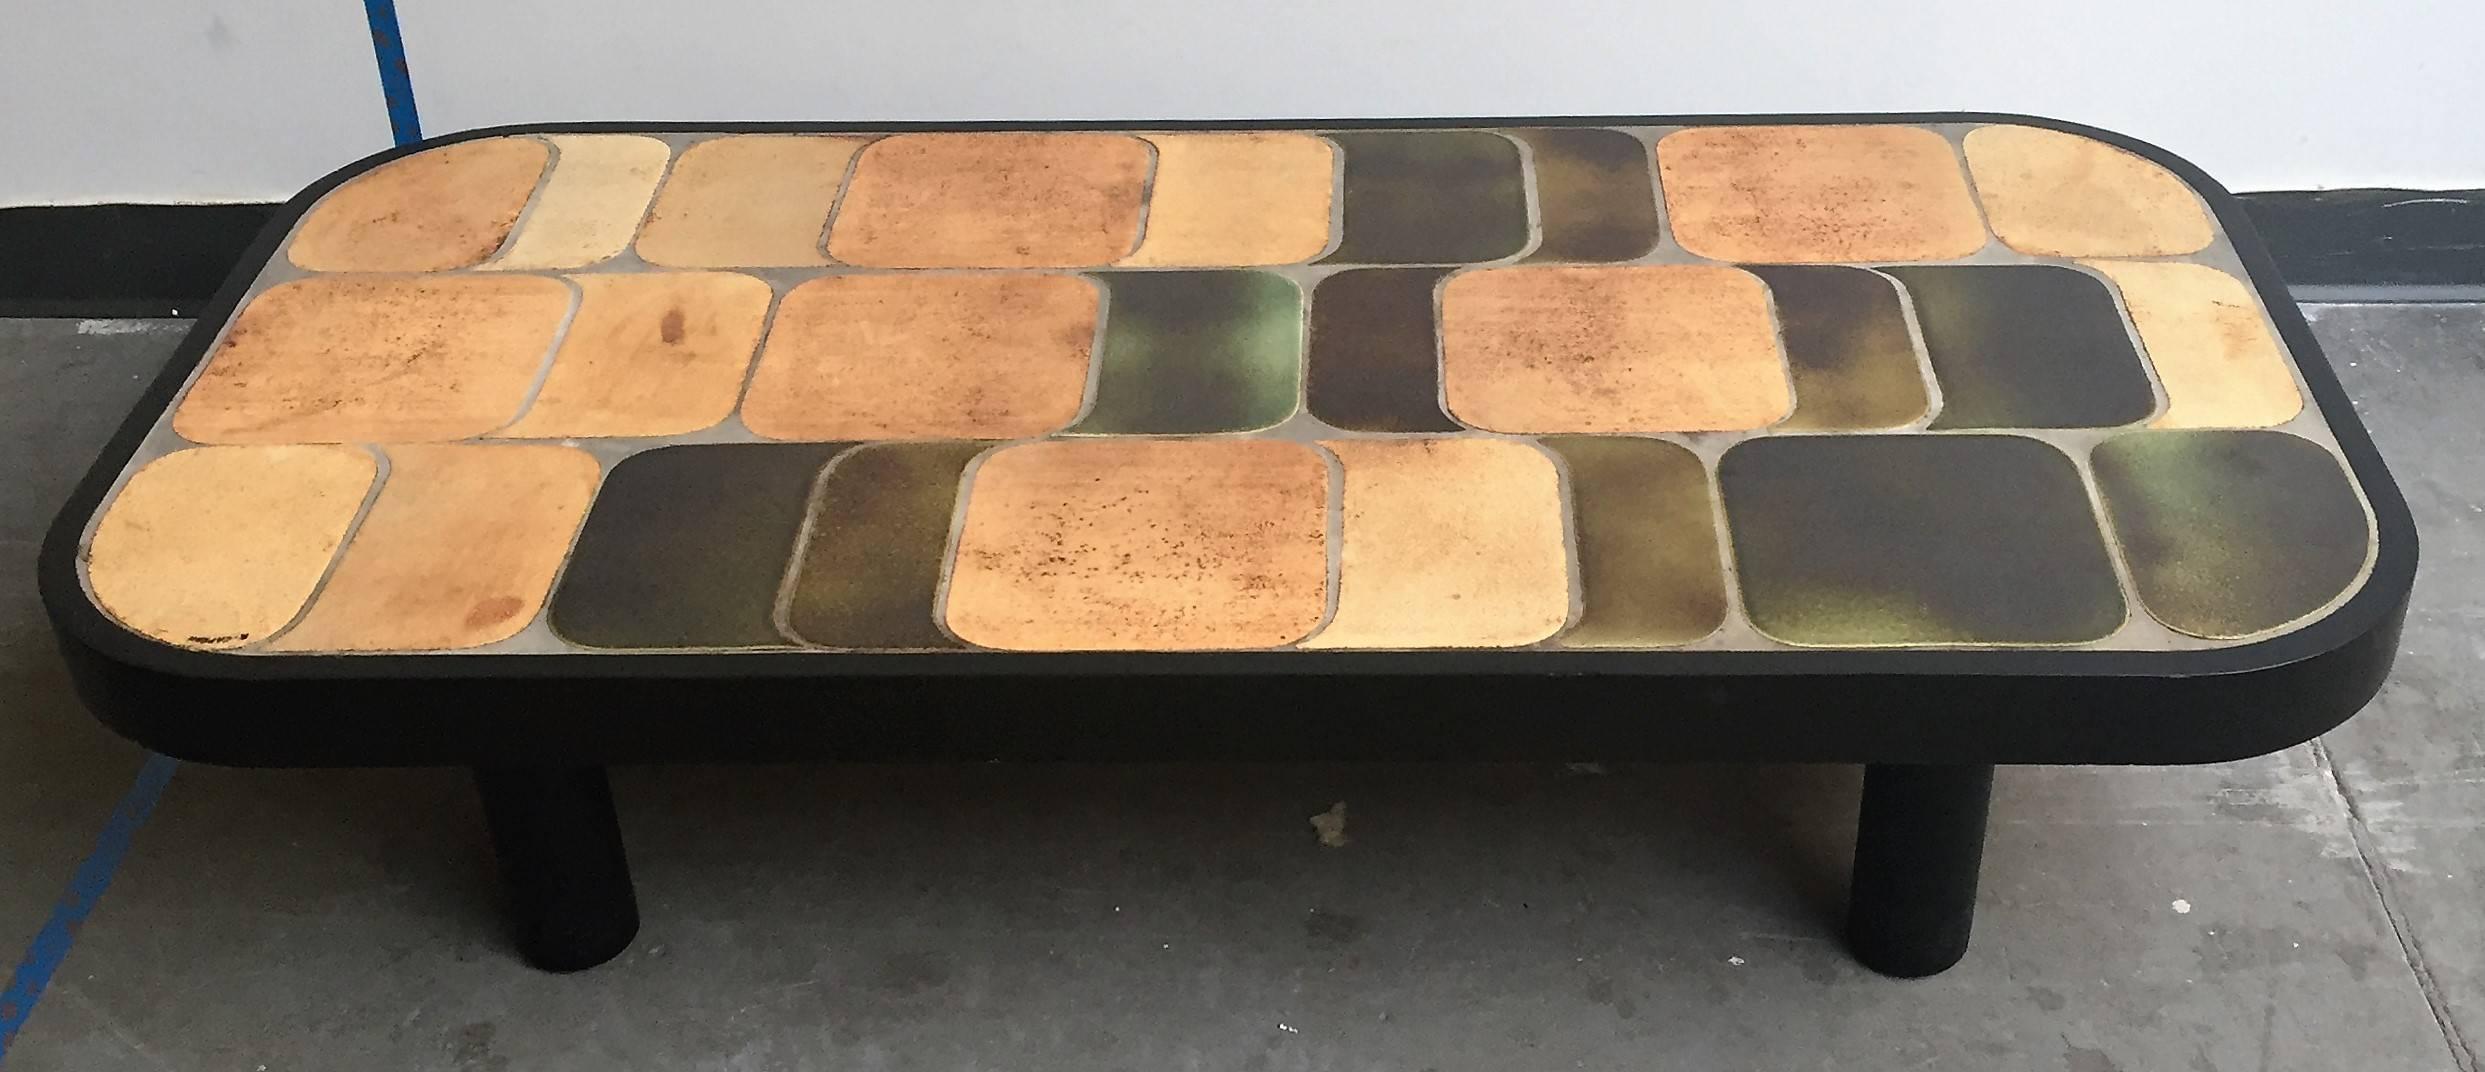 Ceramic Coffee Table by Roger Capron 1